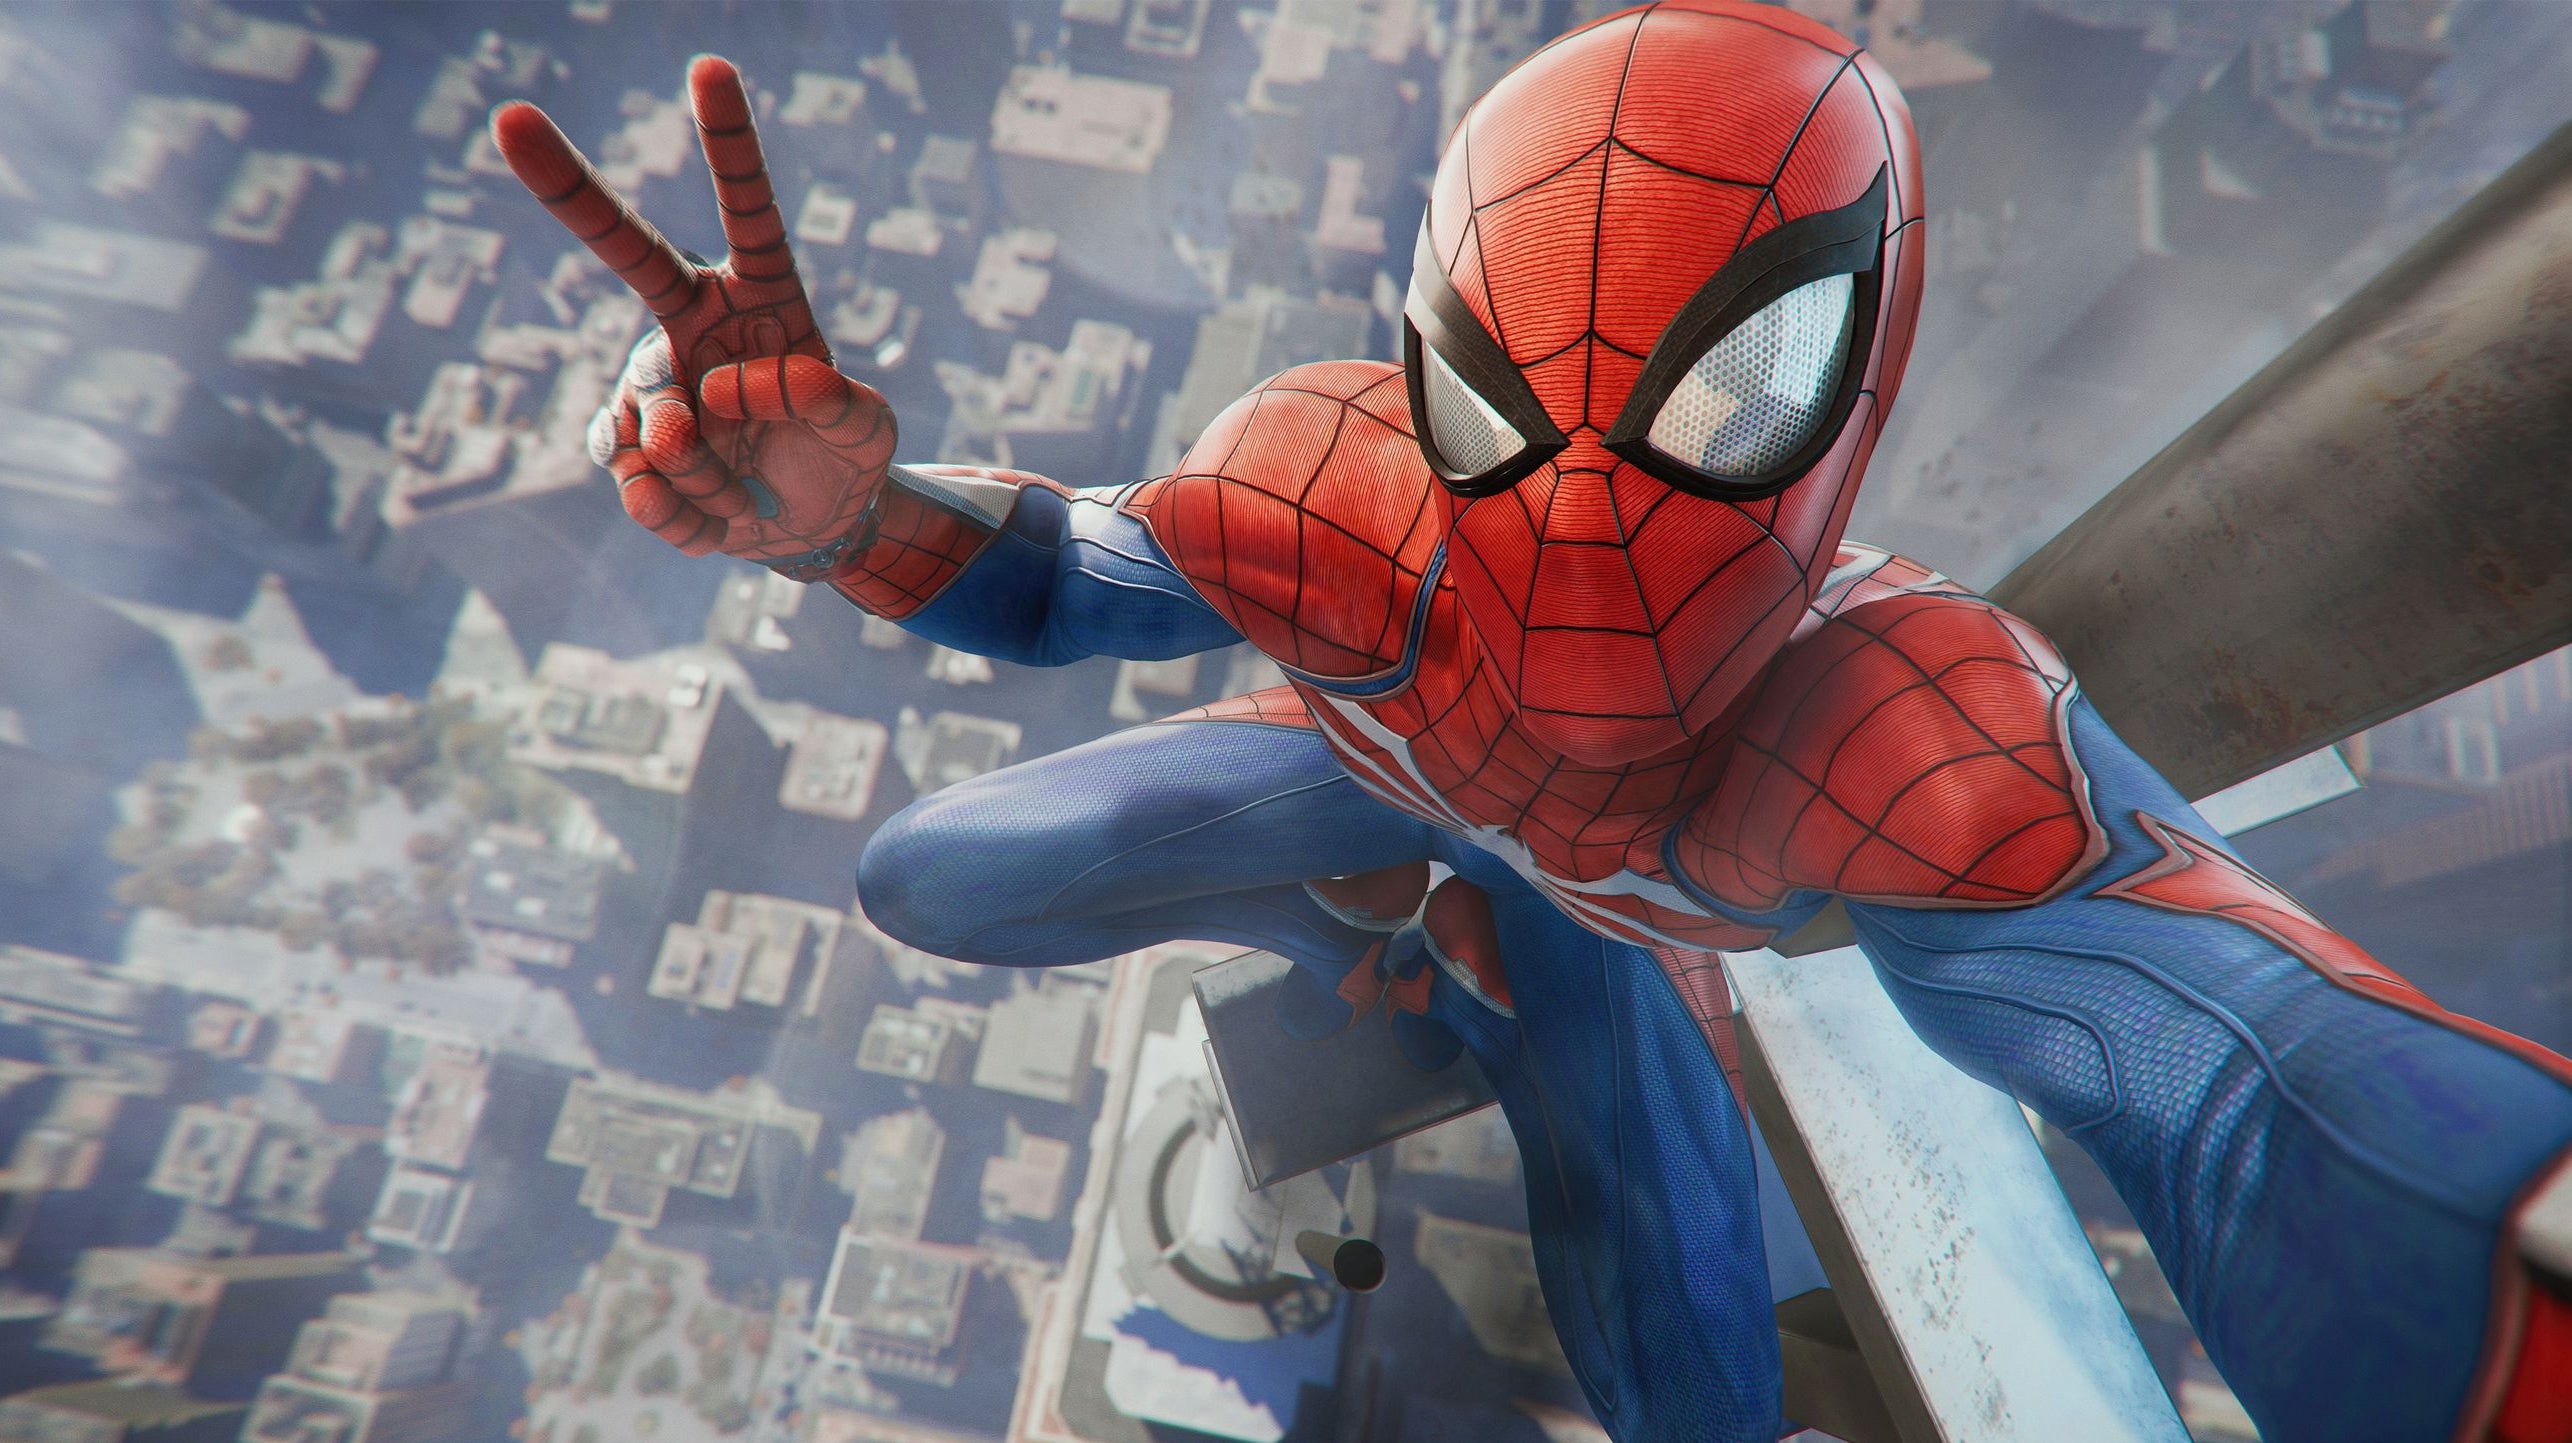 Image for Spider-Man walkthrough, mission list and guide to sidequests and story structure